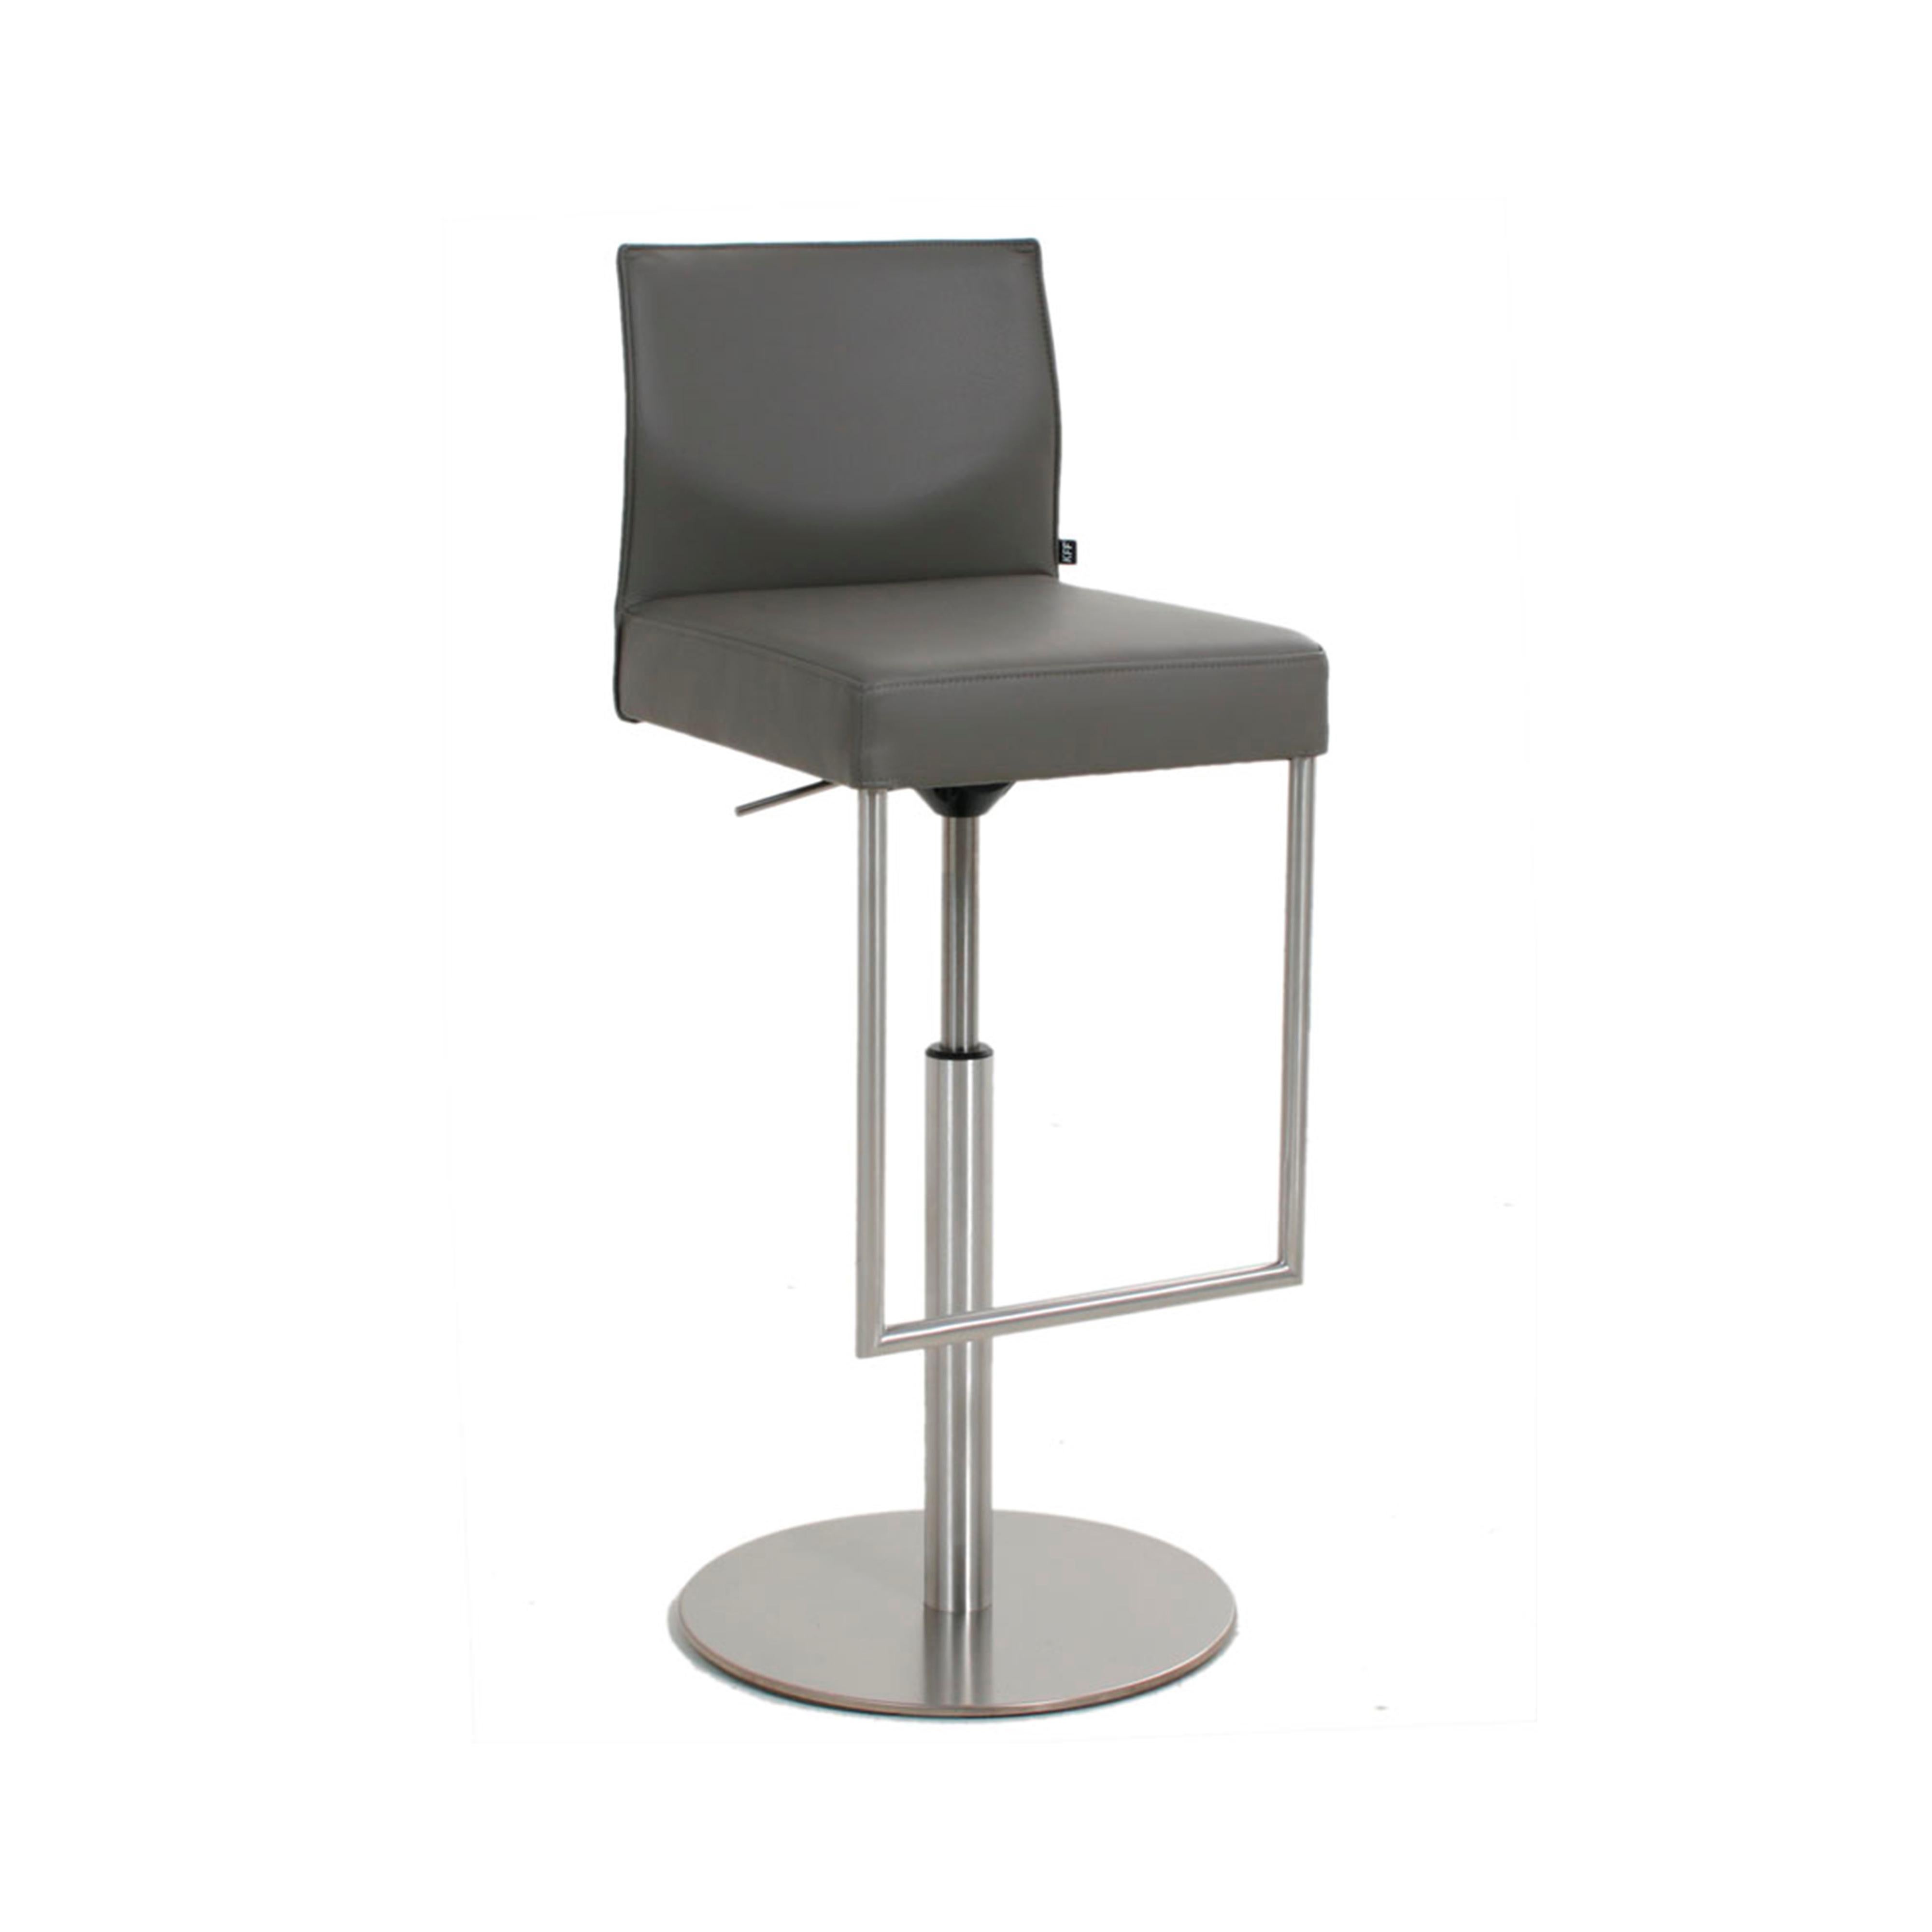 GLOOH Tall Bar Stool with Cantilever in Grey Leather by KFF